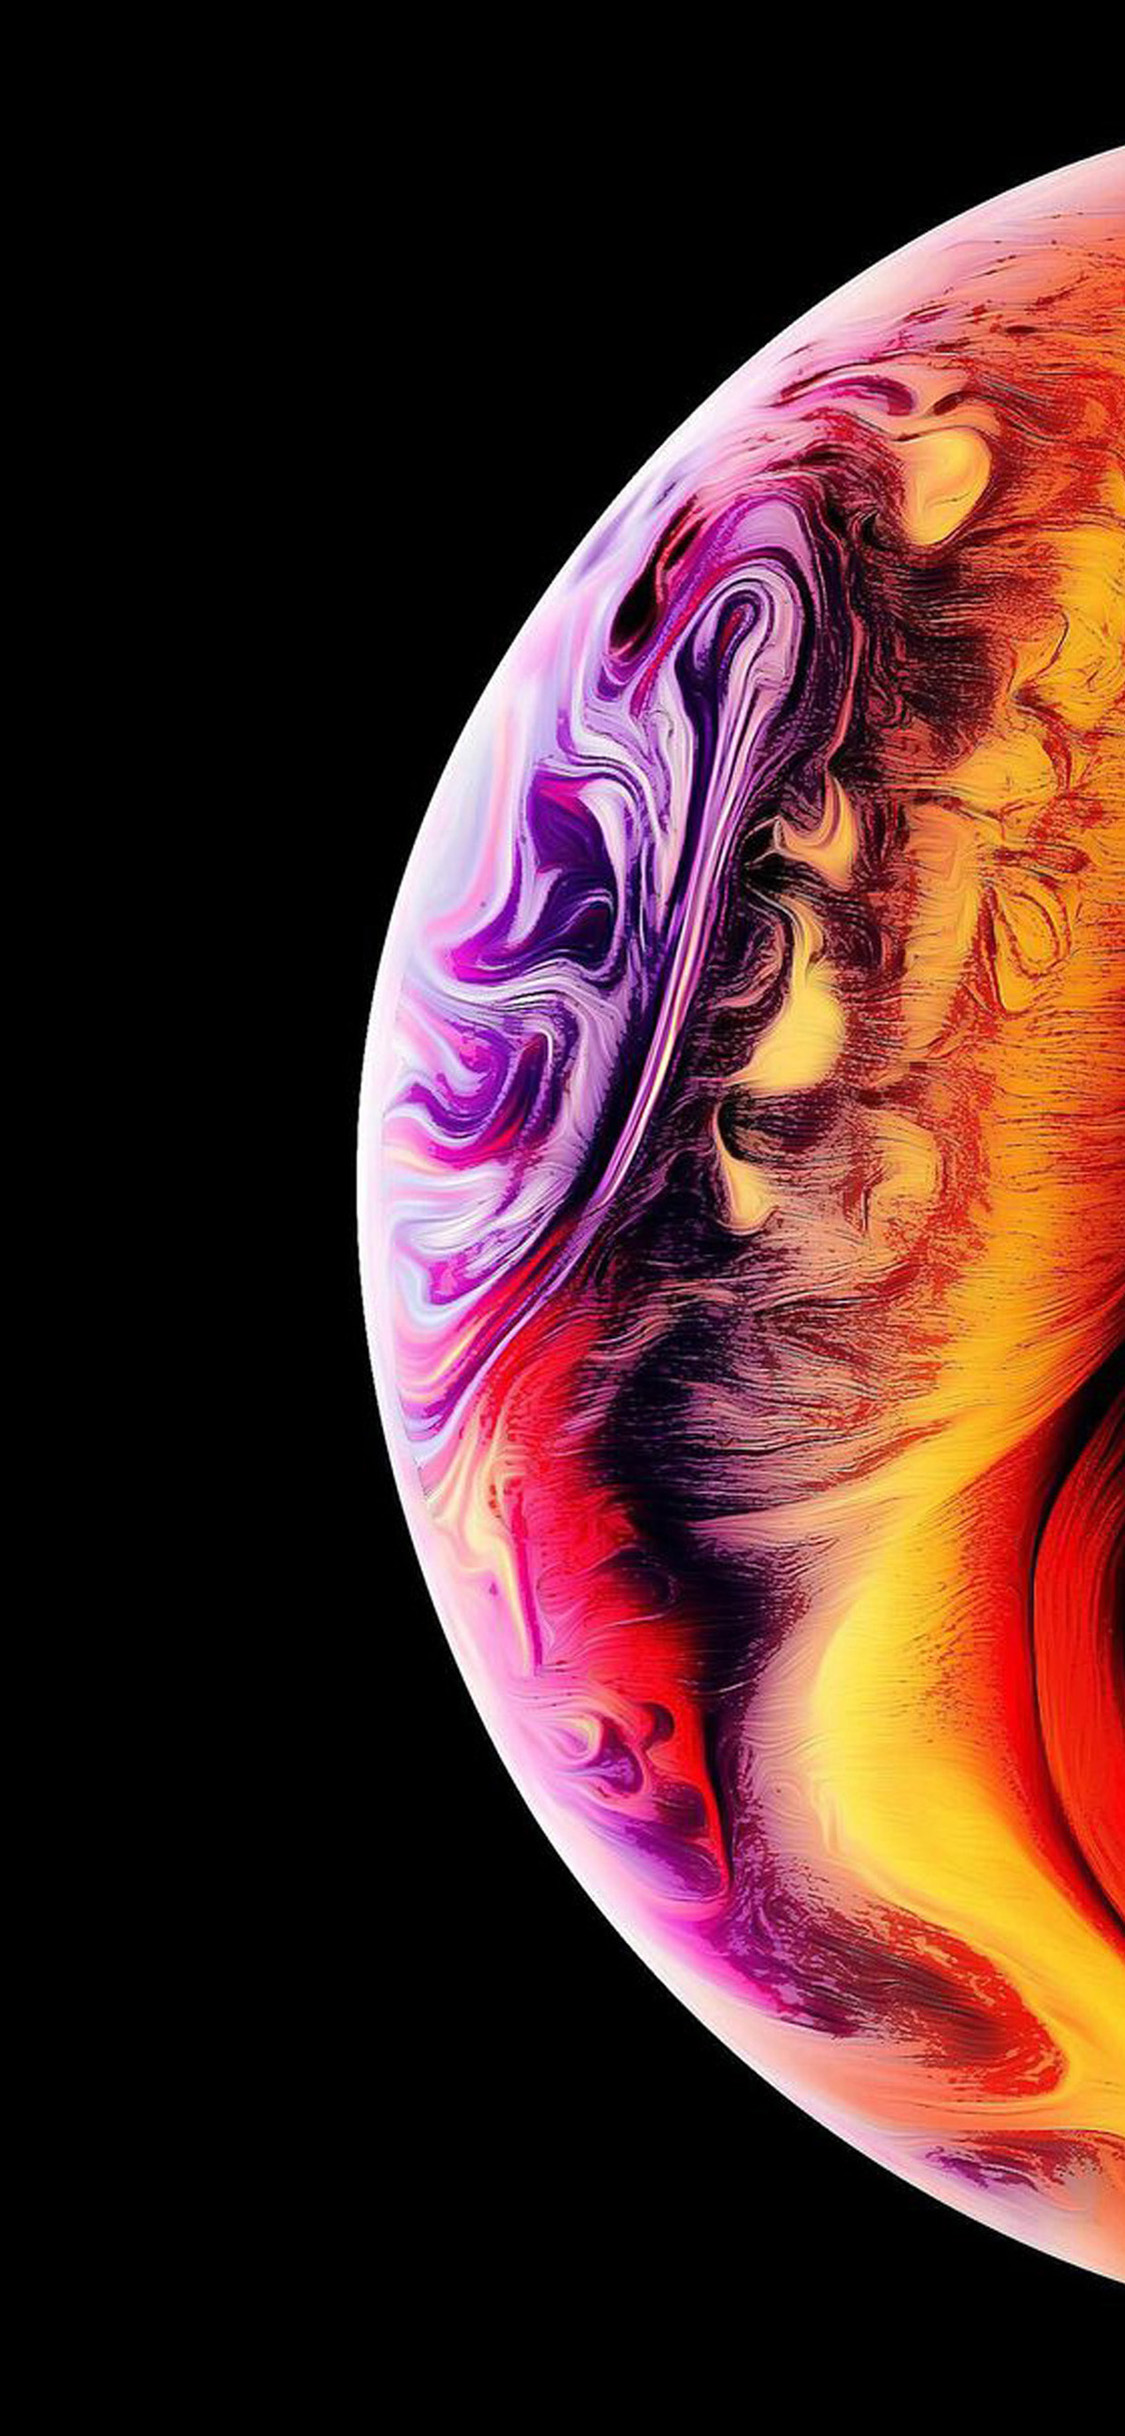 iPhone XS Stock Wallpapers - Download